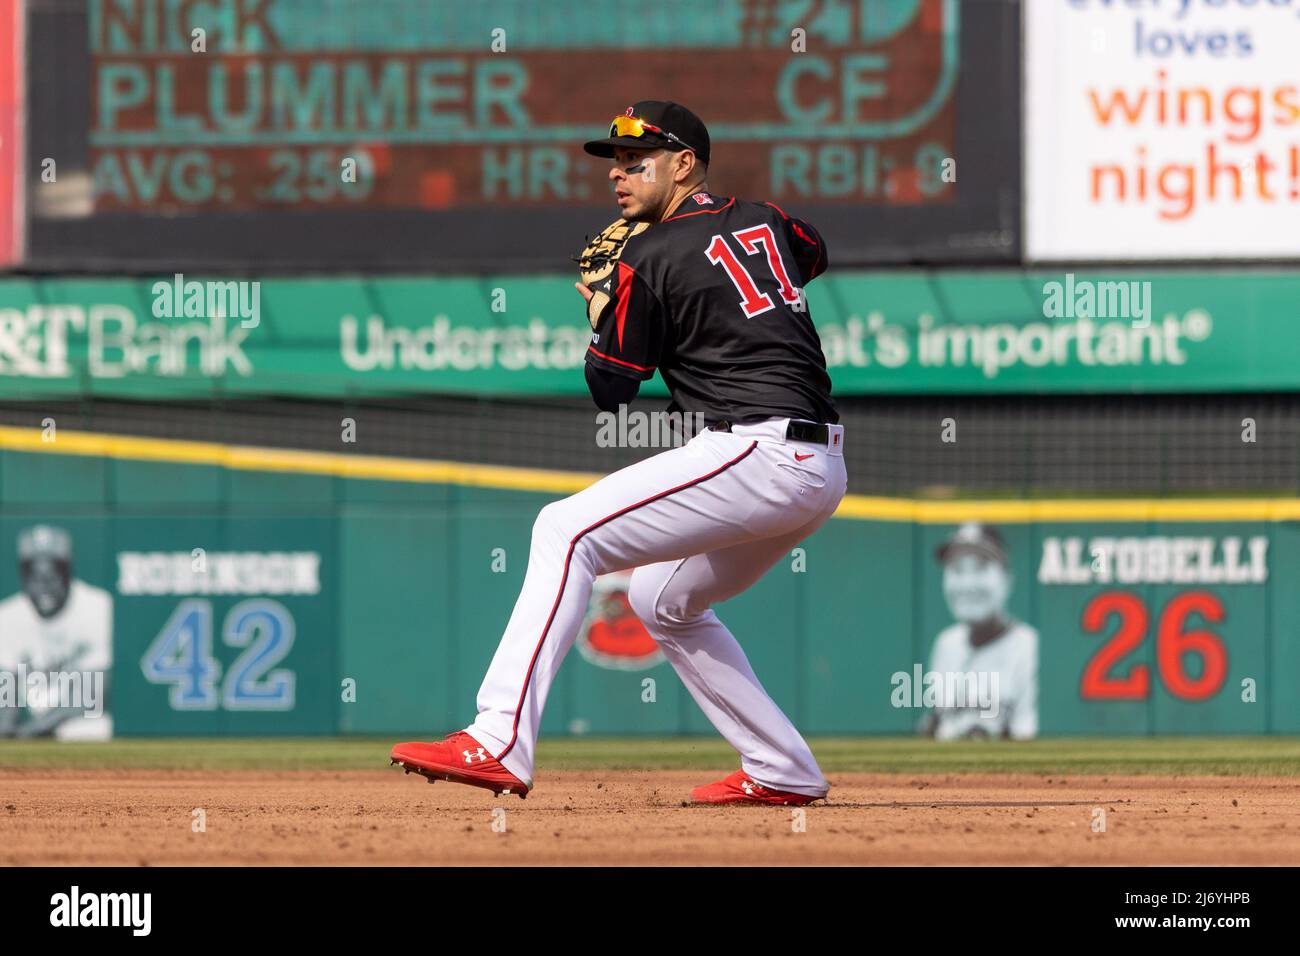 April 30, 2022: Rochester Red Wings infielder Joey Meneses (17